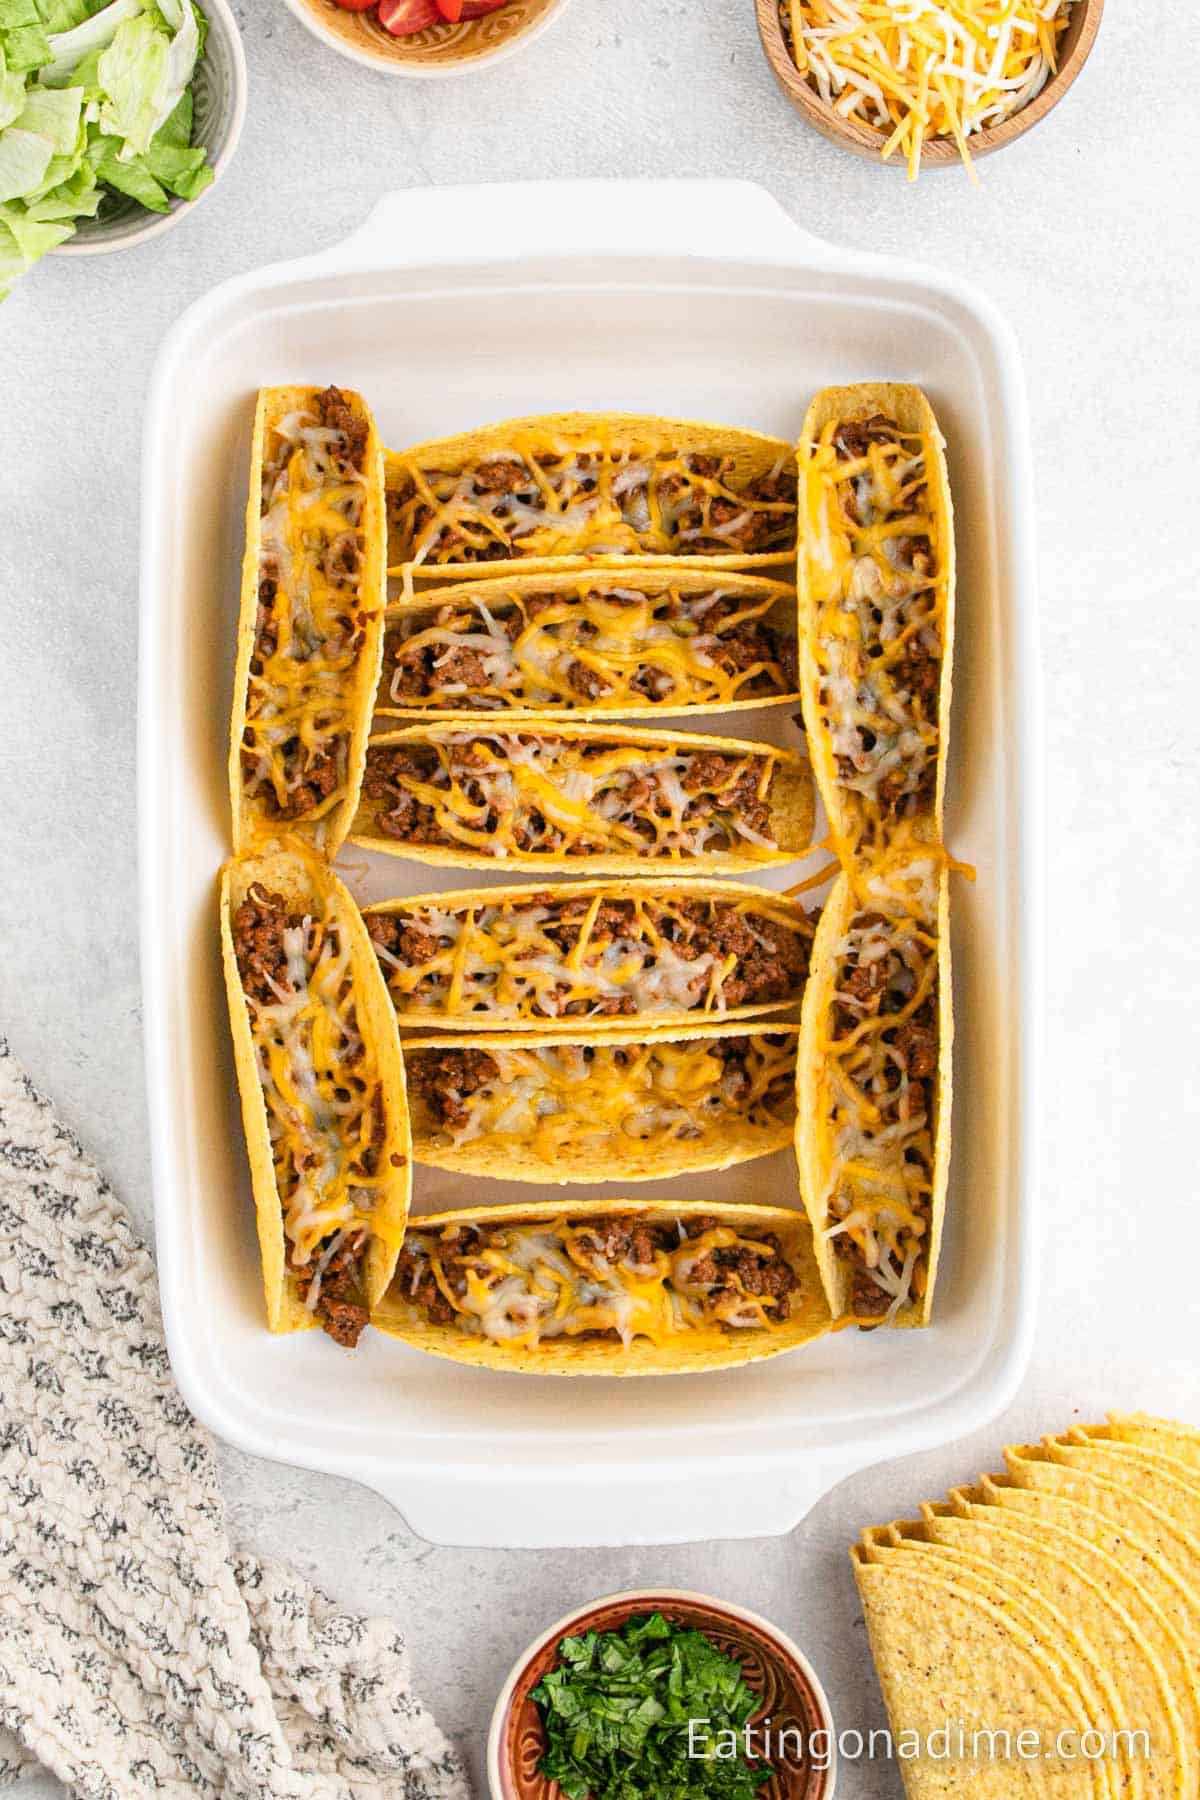 Baked Sloppy Joes in a baking dish